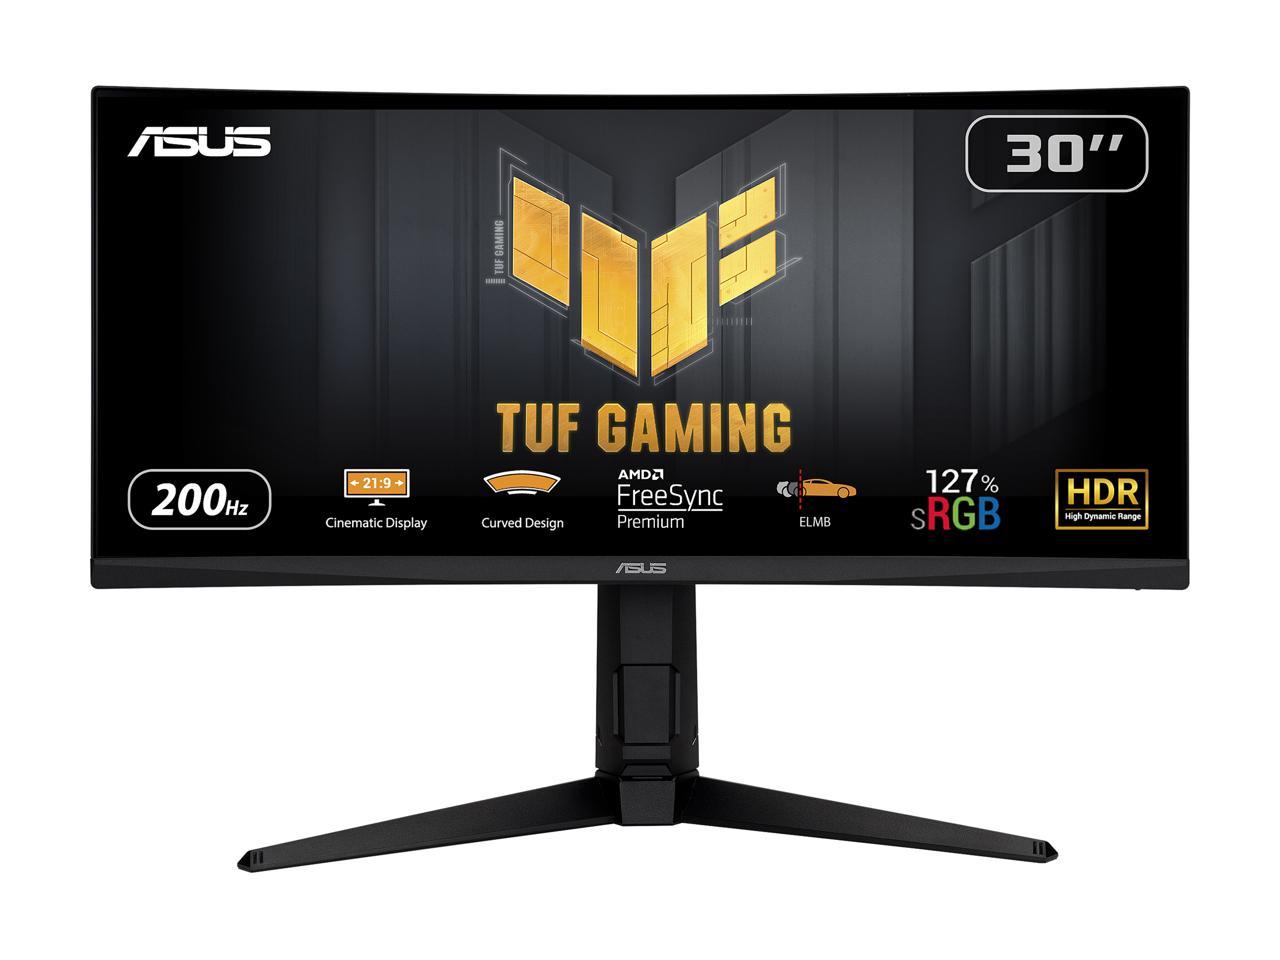 ASUS TUF Gaming 30" 21:9 1080P Ultrawide Curved HDR Monitor (VG30VQL1A) - WFHD (2560 x 1080), 200Hz (Supports 144Hz), 1ms, Extreme Low Motion Blur, FreeSync Premium, Eye Care, DisplayPort, HDMI